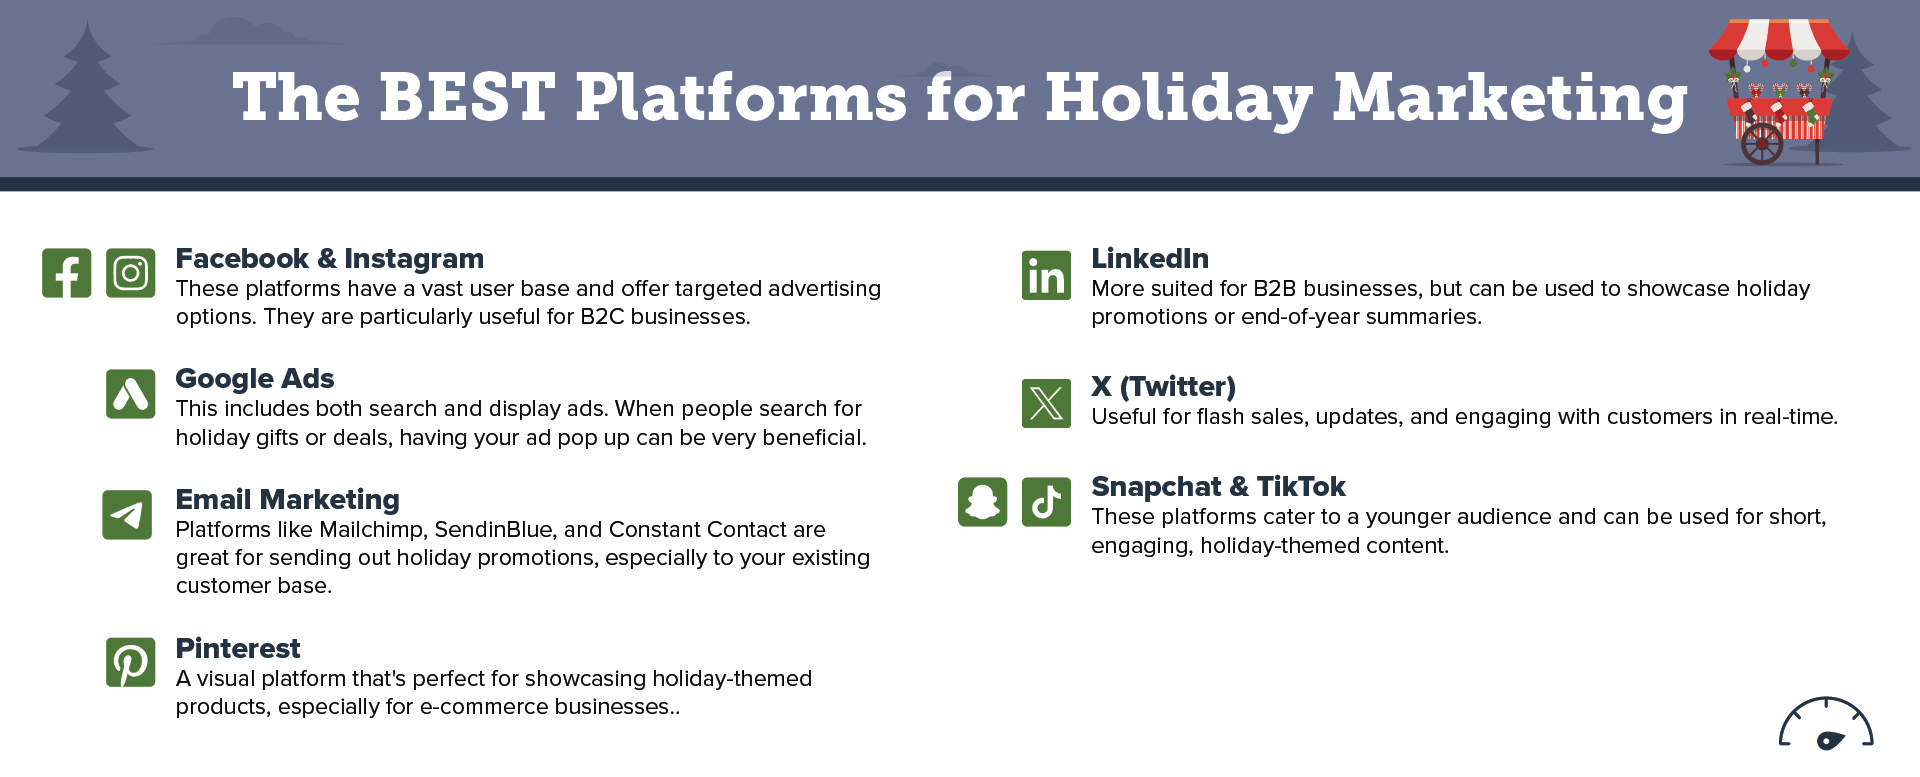 Infographic that lists the top nine social media and other platforms for small businesses to advertise on over the holidays, including Facebook, Instagram, Google Ads, Email Marketing, Pinterest, LinkedIn, X (Twitter), Snapchat, and Tiktok